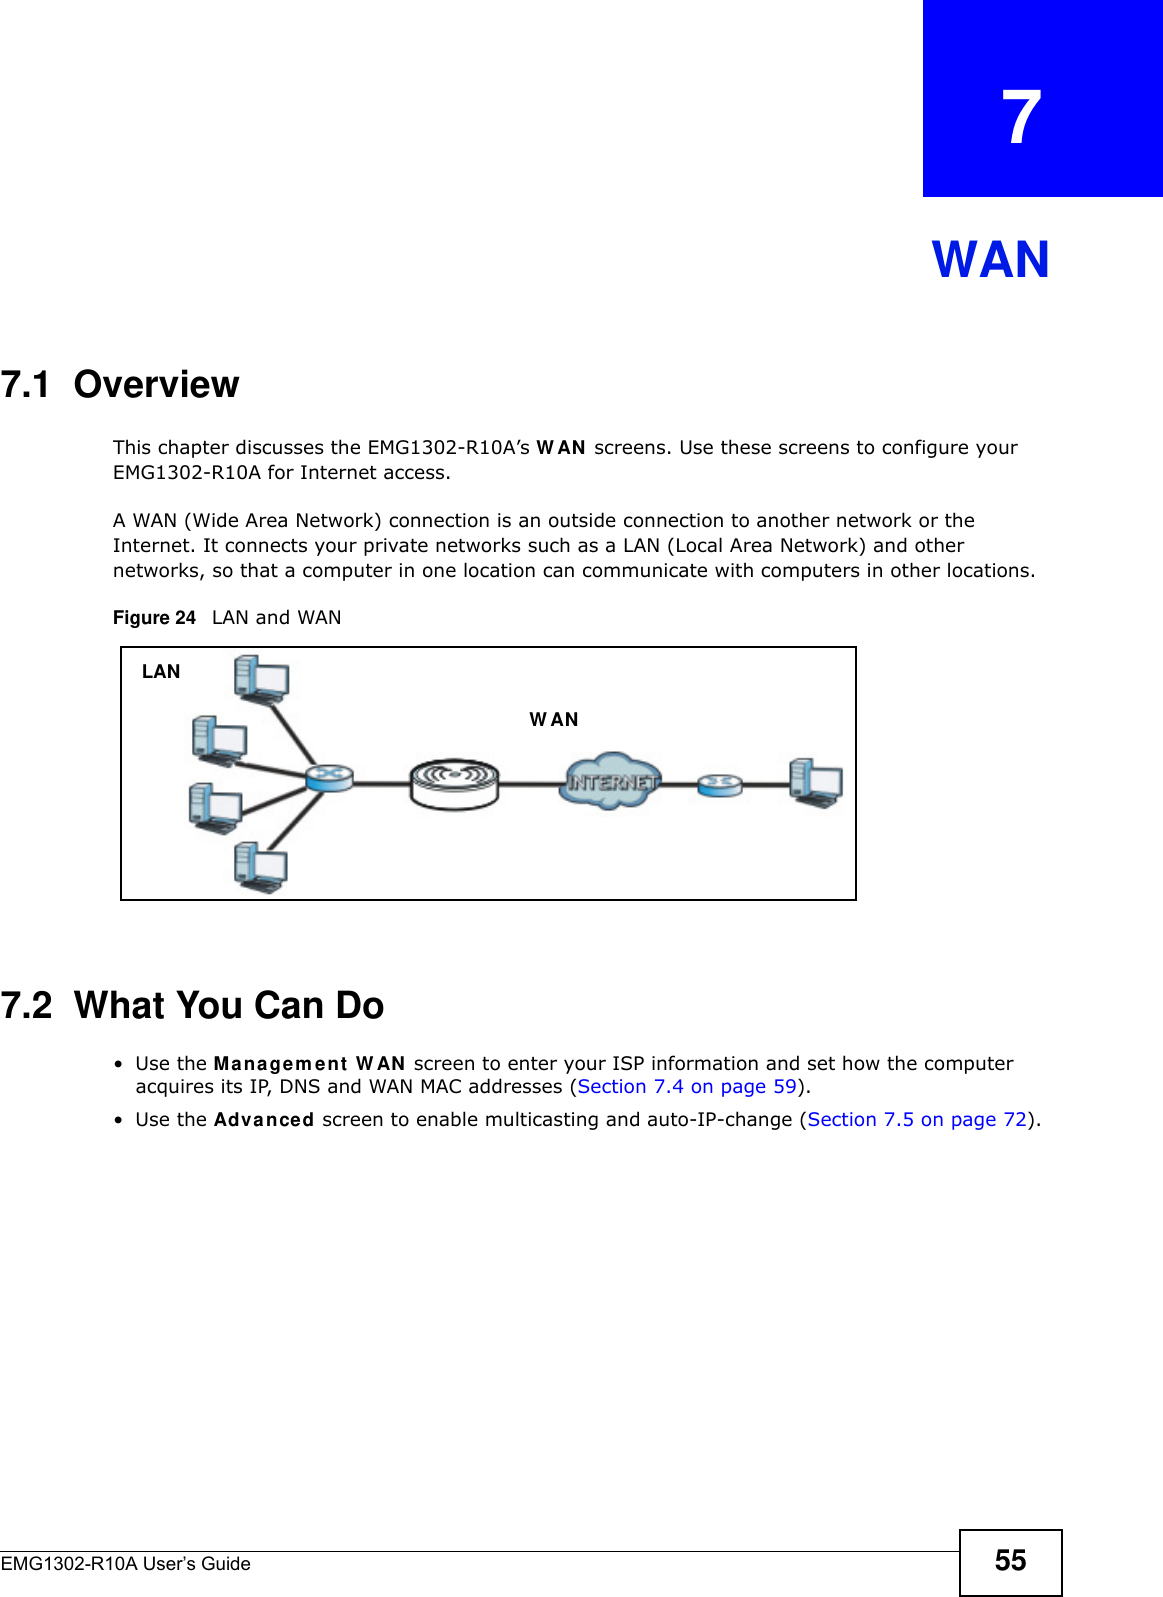 EMG1302-R10A User’s Guide 55CHAPTER   7WAN7.1  OverviewThis chapter discusses the EMG1302-R10A’s W AN  screens. Use these screens to configure your EMG1302-R10A for Internet access.A WAN (Wide Area Network) connection is an outside connection to another network or the Internet. It connects your private networks such as a LAN (Local Area Network) and other networks, so that a computer in one location can communicate with computers in other locations.Figure 24   LAN and WAN7.2  What You Can Do•Use the Mana gem e n t  W AN  screen to enter your ISP information and set how the computer acquires its IP, DNS and WAN MAC addresses (Section 7.4 on page 59).•Use the Adva nced screen to enable multicasting and auto-IP-change (Section 7.5 on page 72).LANW AN